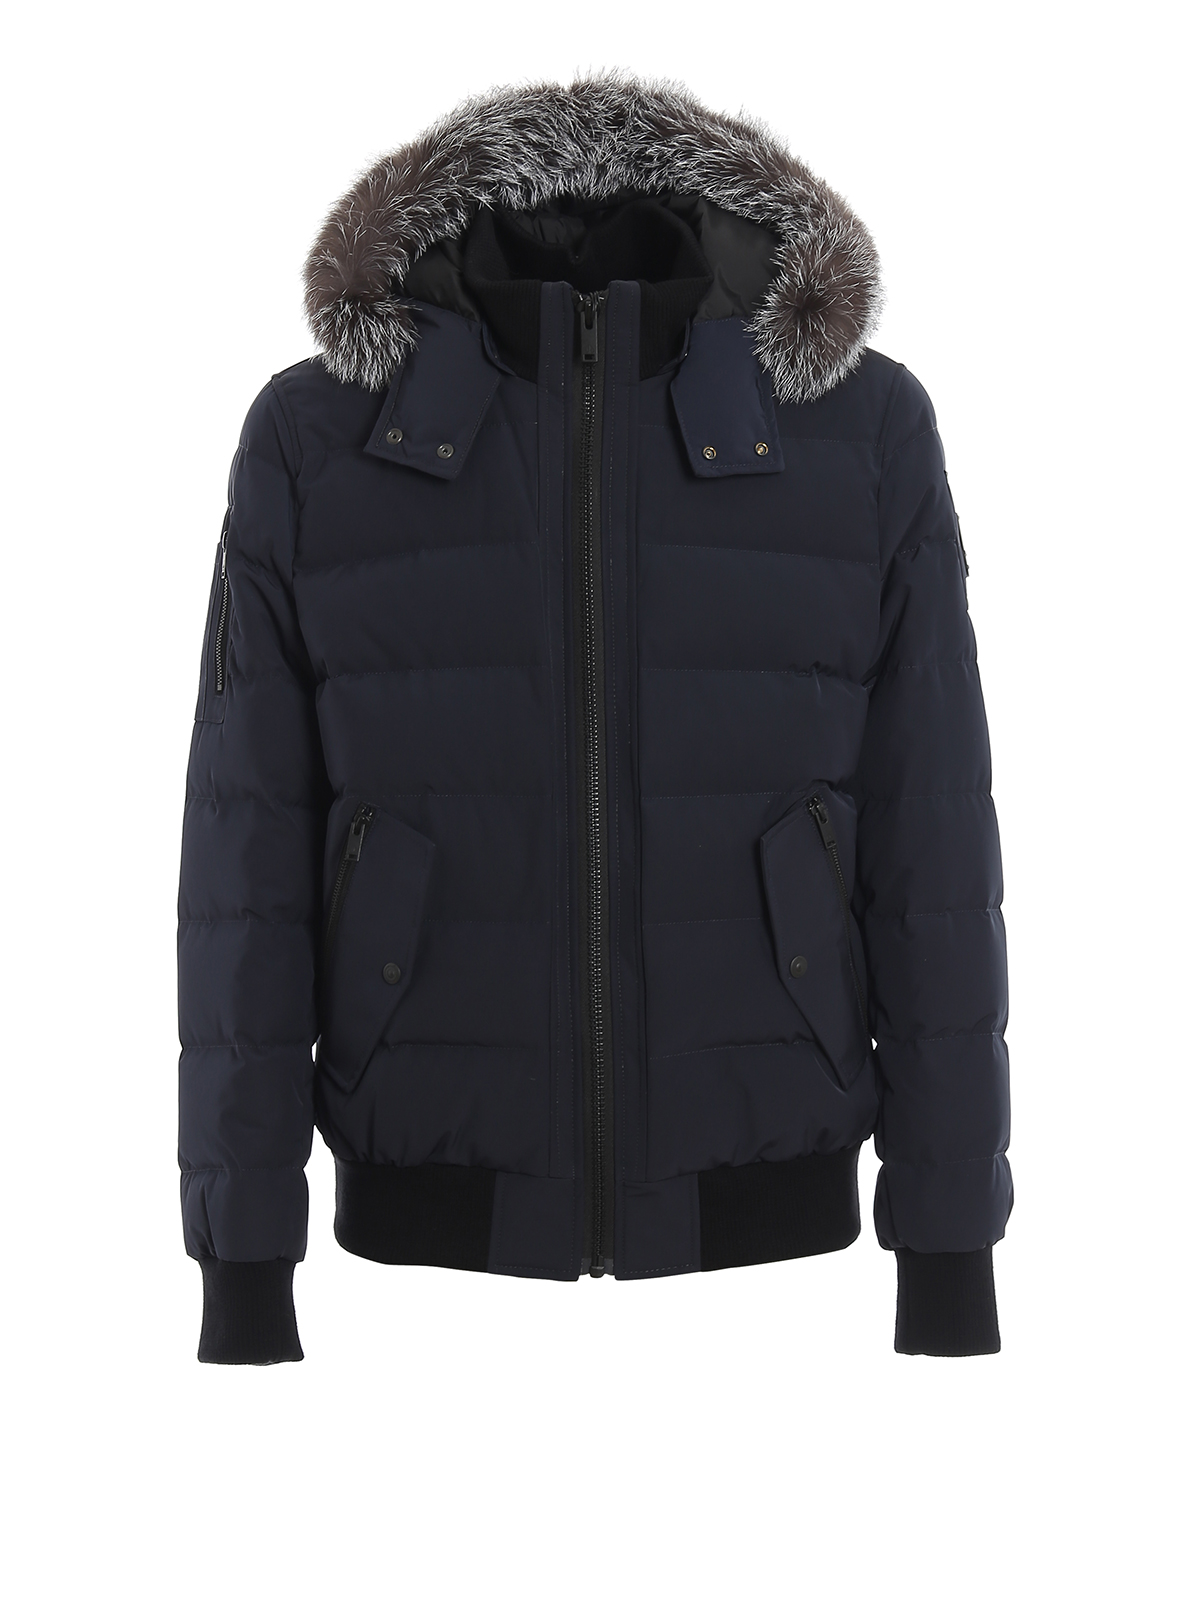 MOOSE KNUCKLES SCOTCHTOWN BOMBER STYLE PADDED JACKET